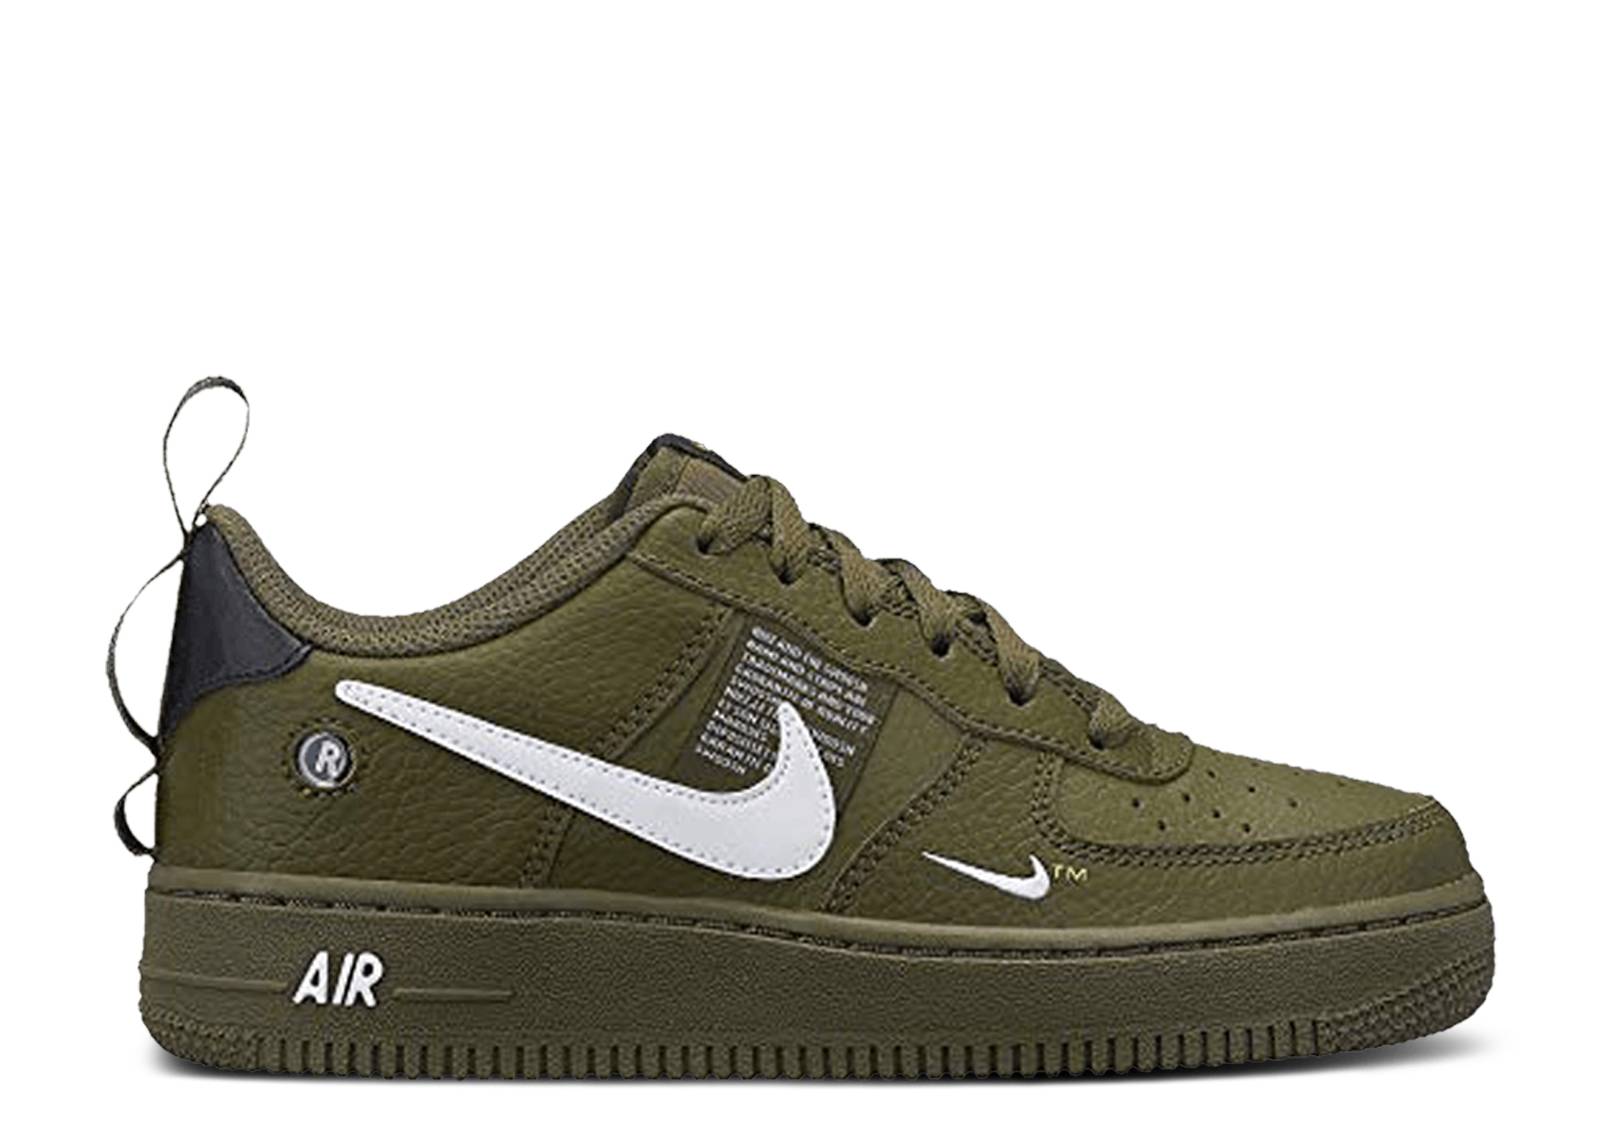 Air Force 1 LV8 Utility PS 'Olive Green'